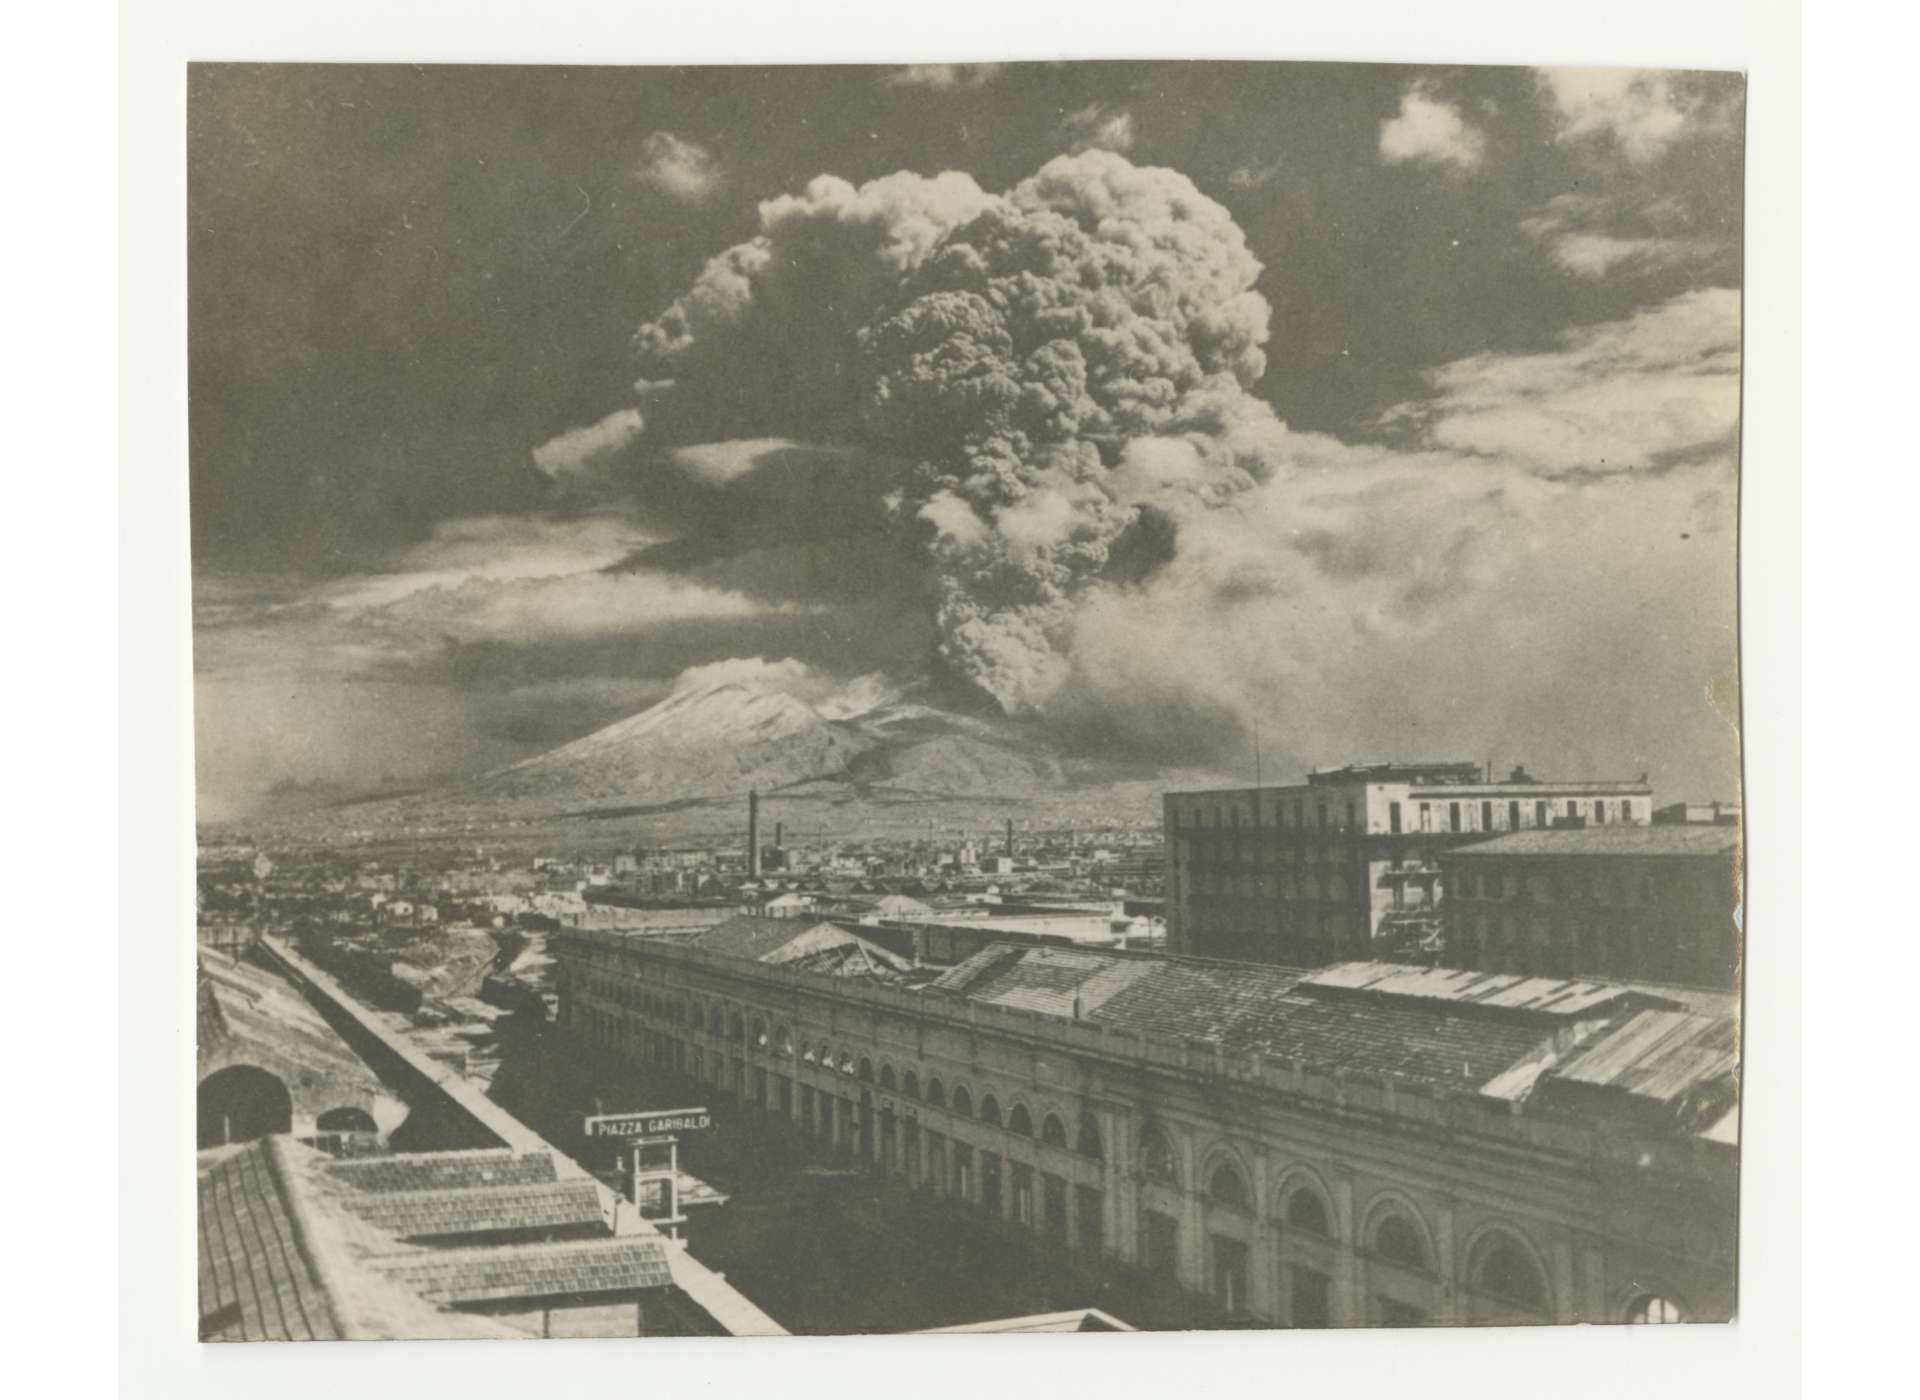 Mount Vesuvius erupts near Naples, Spring 1944. Gift of Melissa Bourne, from the Collection of The National WWII Museum, 2009.214.044.